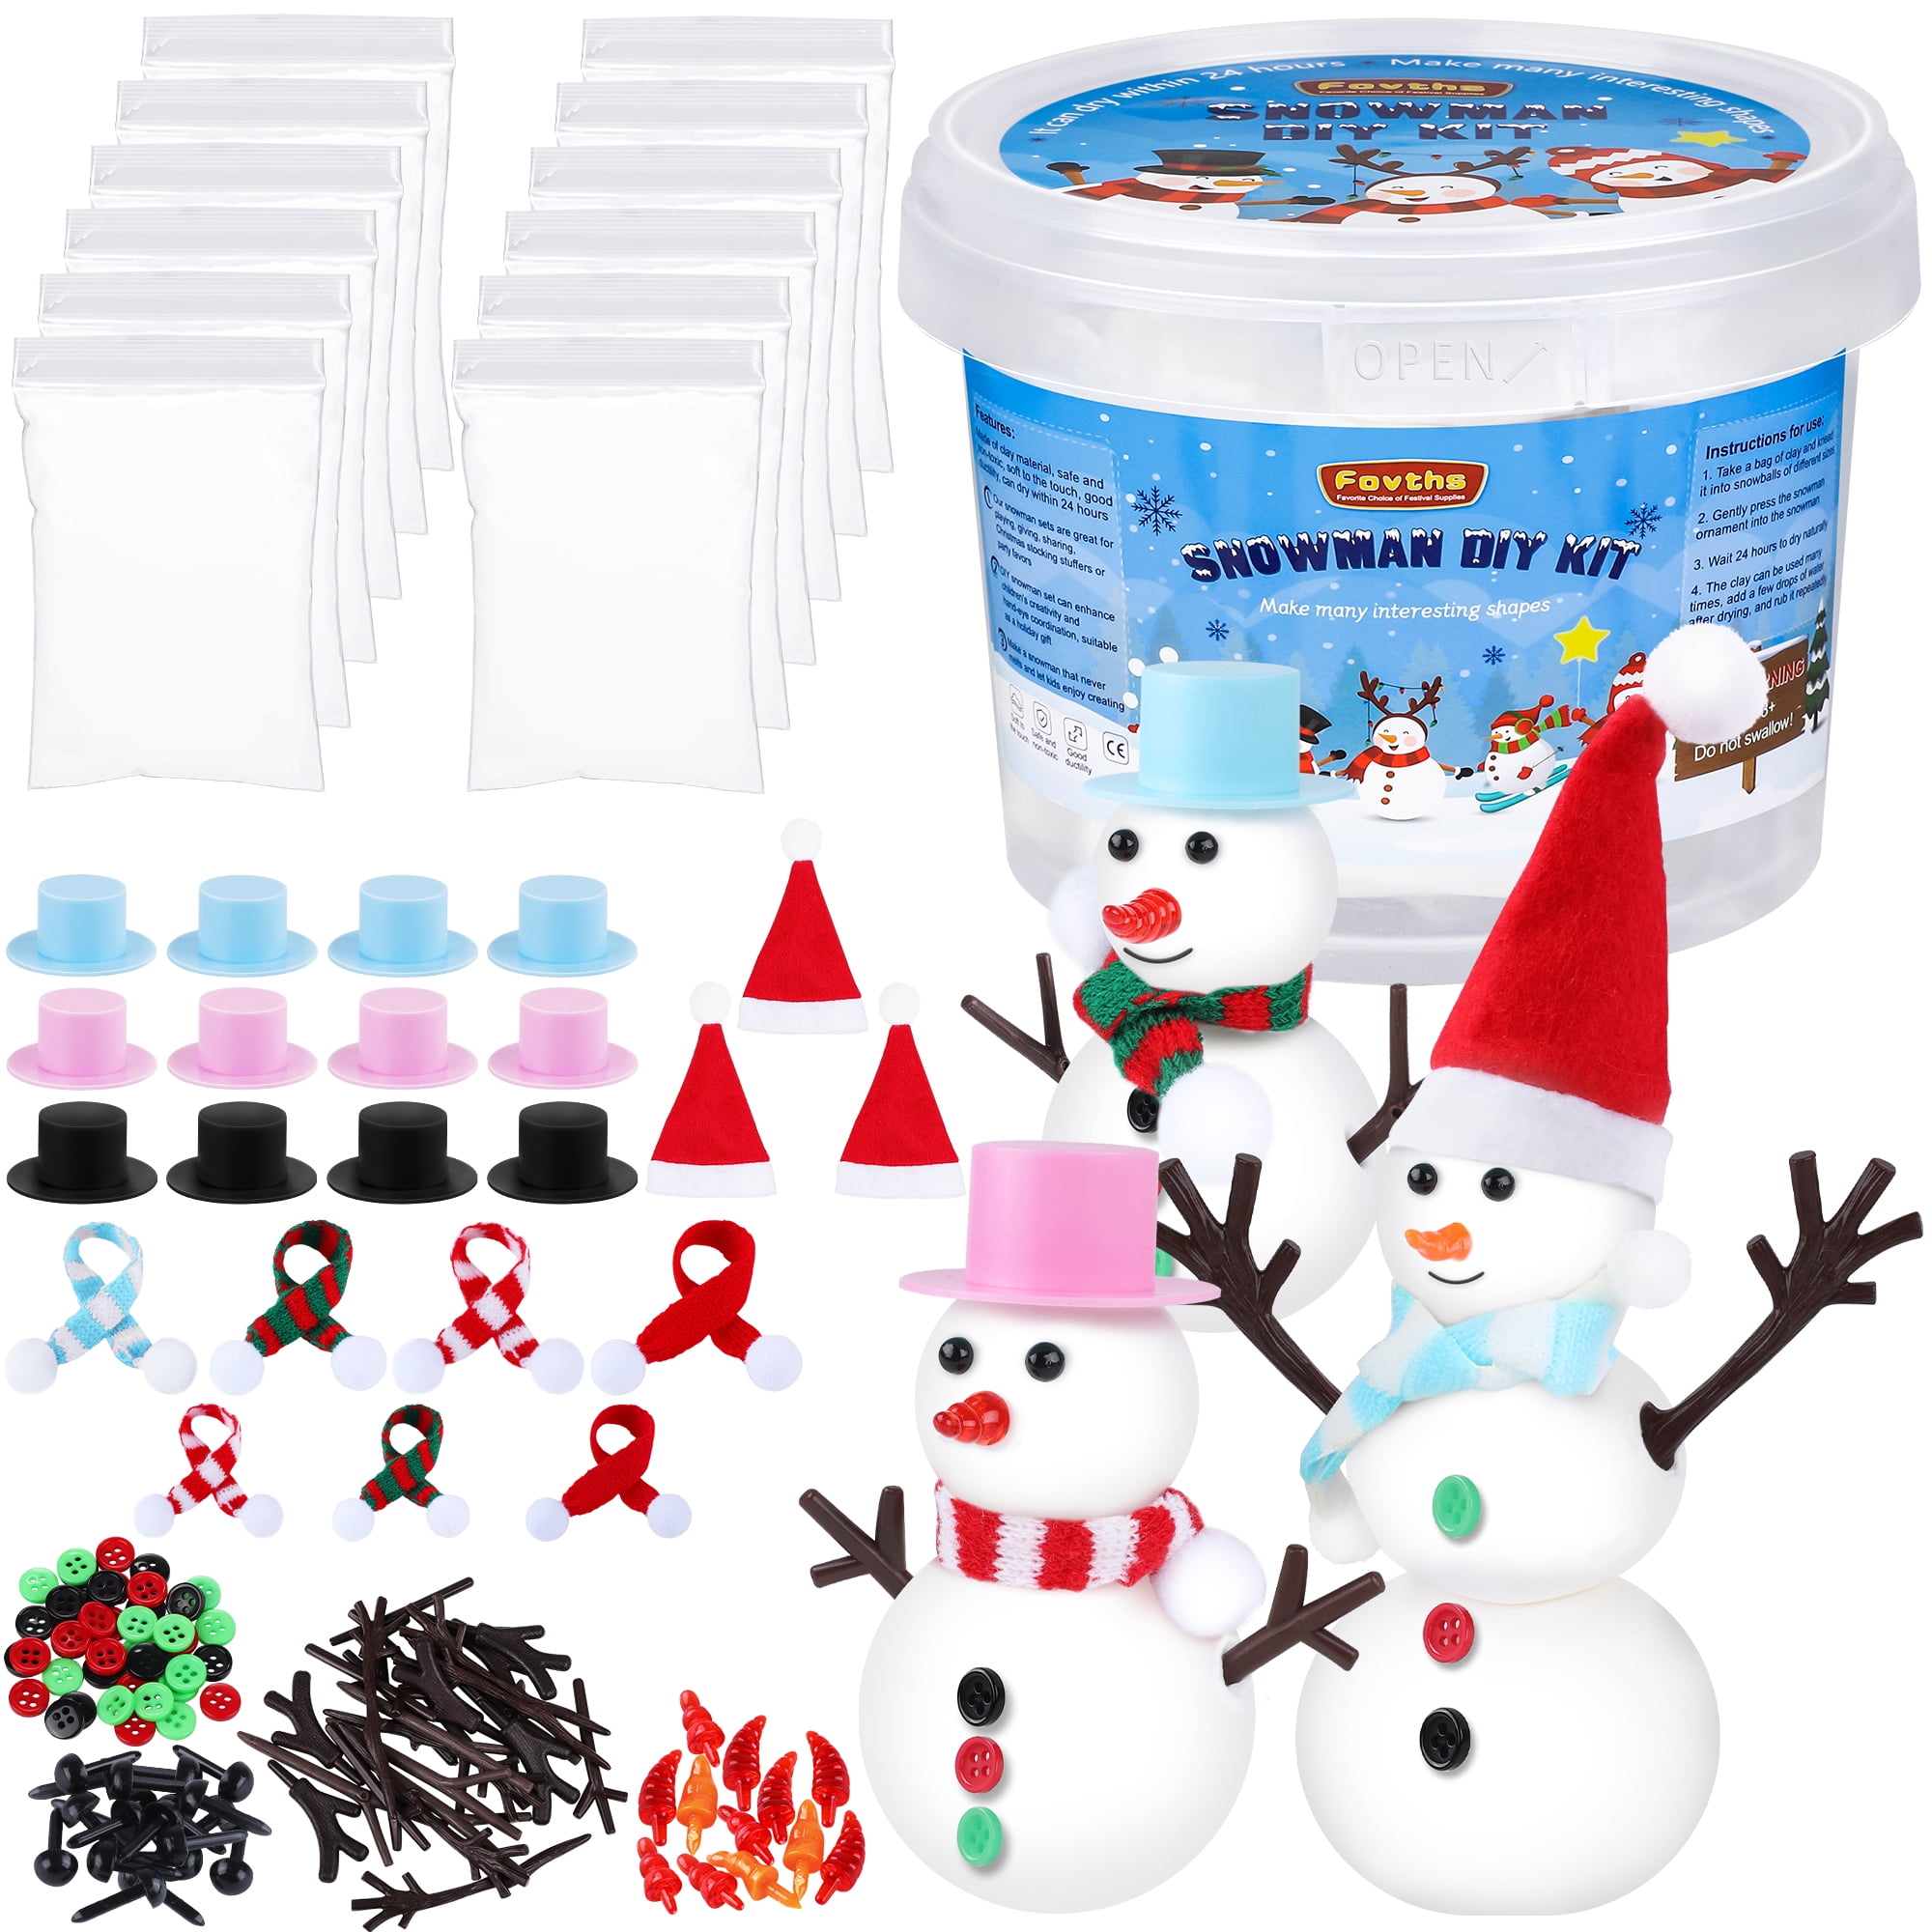 BANBBUR 12Pack Snowman Crafts for Kids Snowman DIY Kit, Build a Snowman Kit  Molding Clay Christmas Crafts,Xmas Gift Christmas Stocking Stuffers for